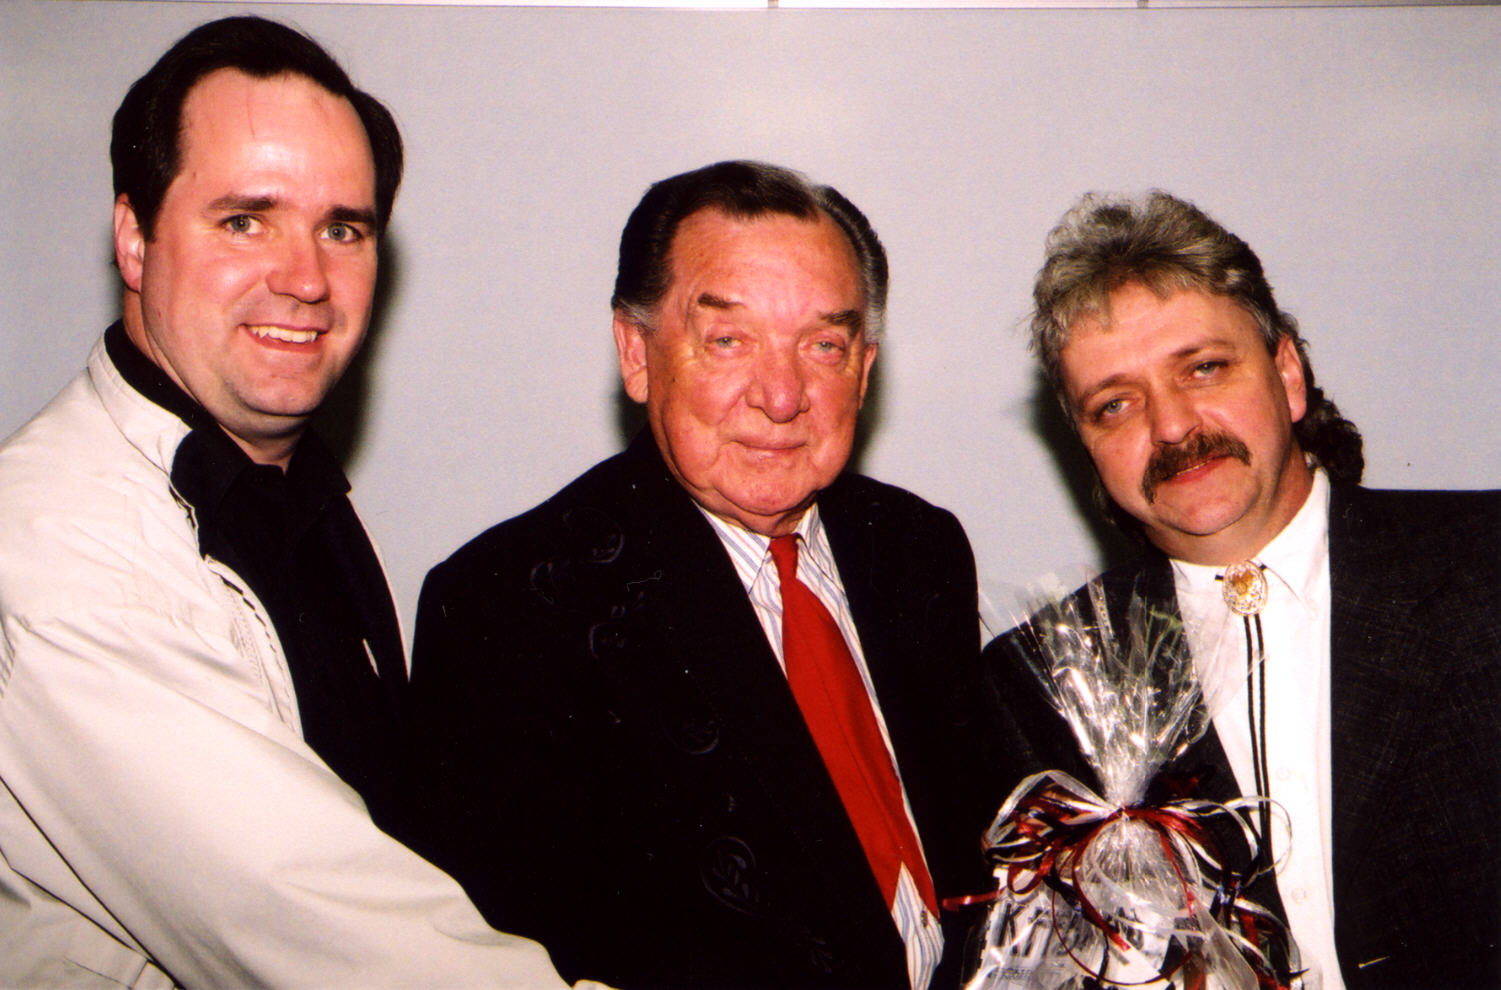 Bob Connell, Ray Price and David Grimes backstage at Melbourne